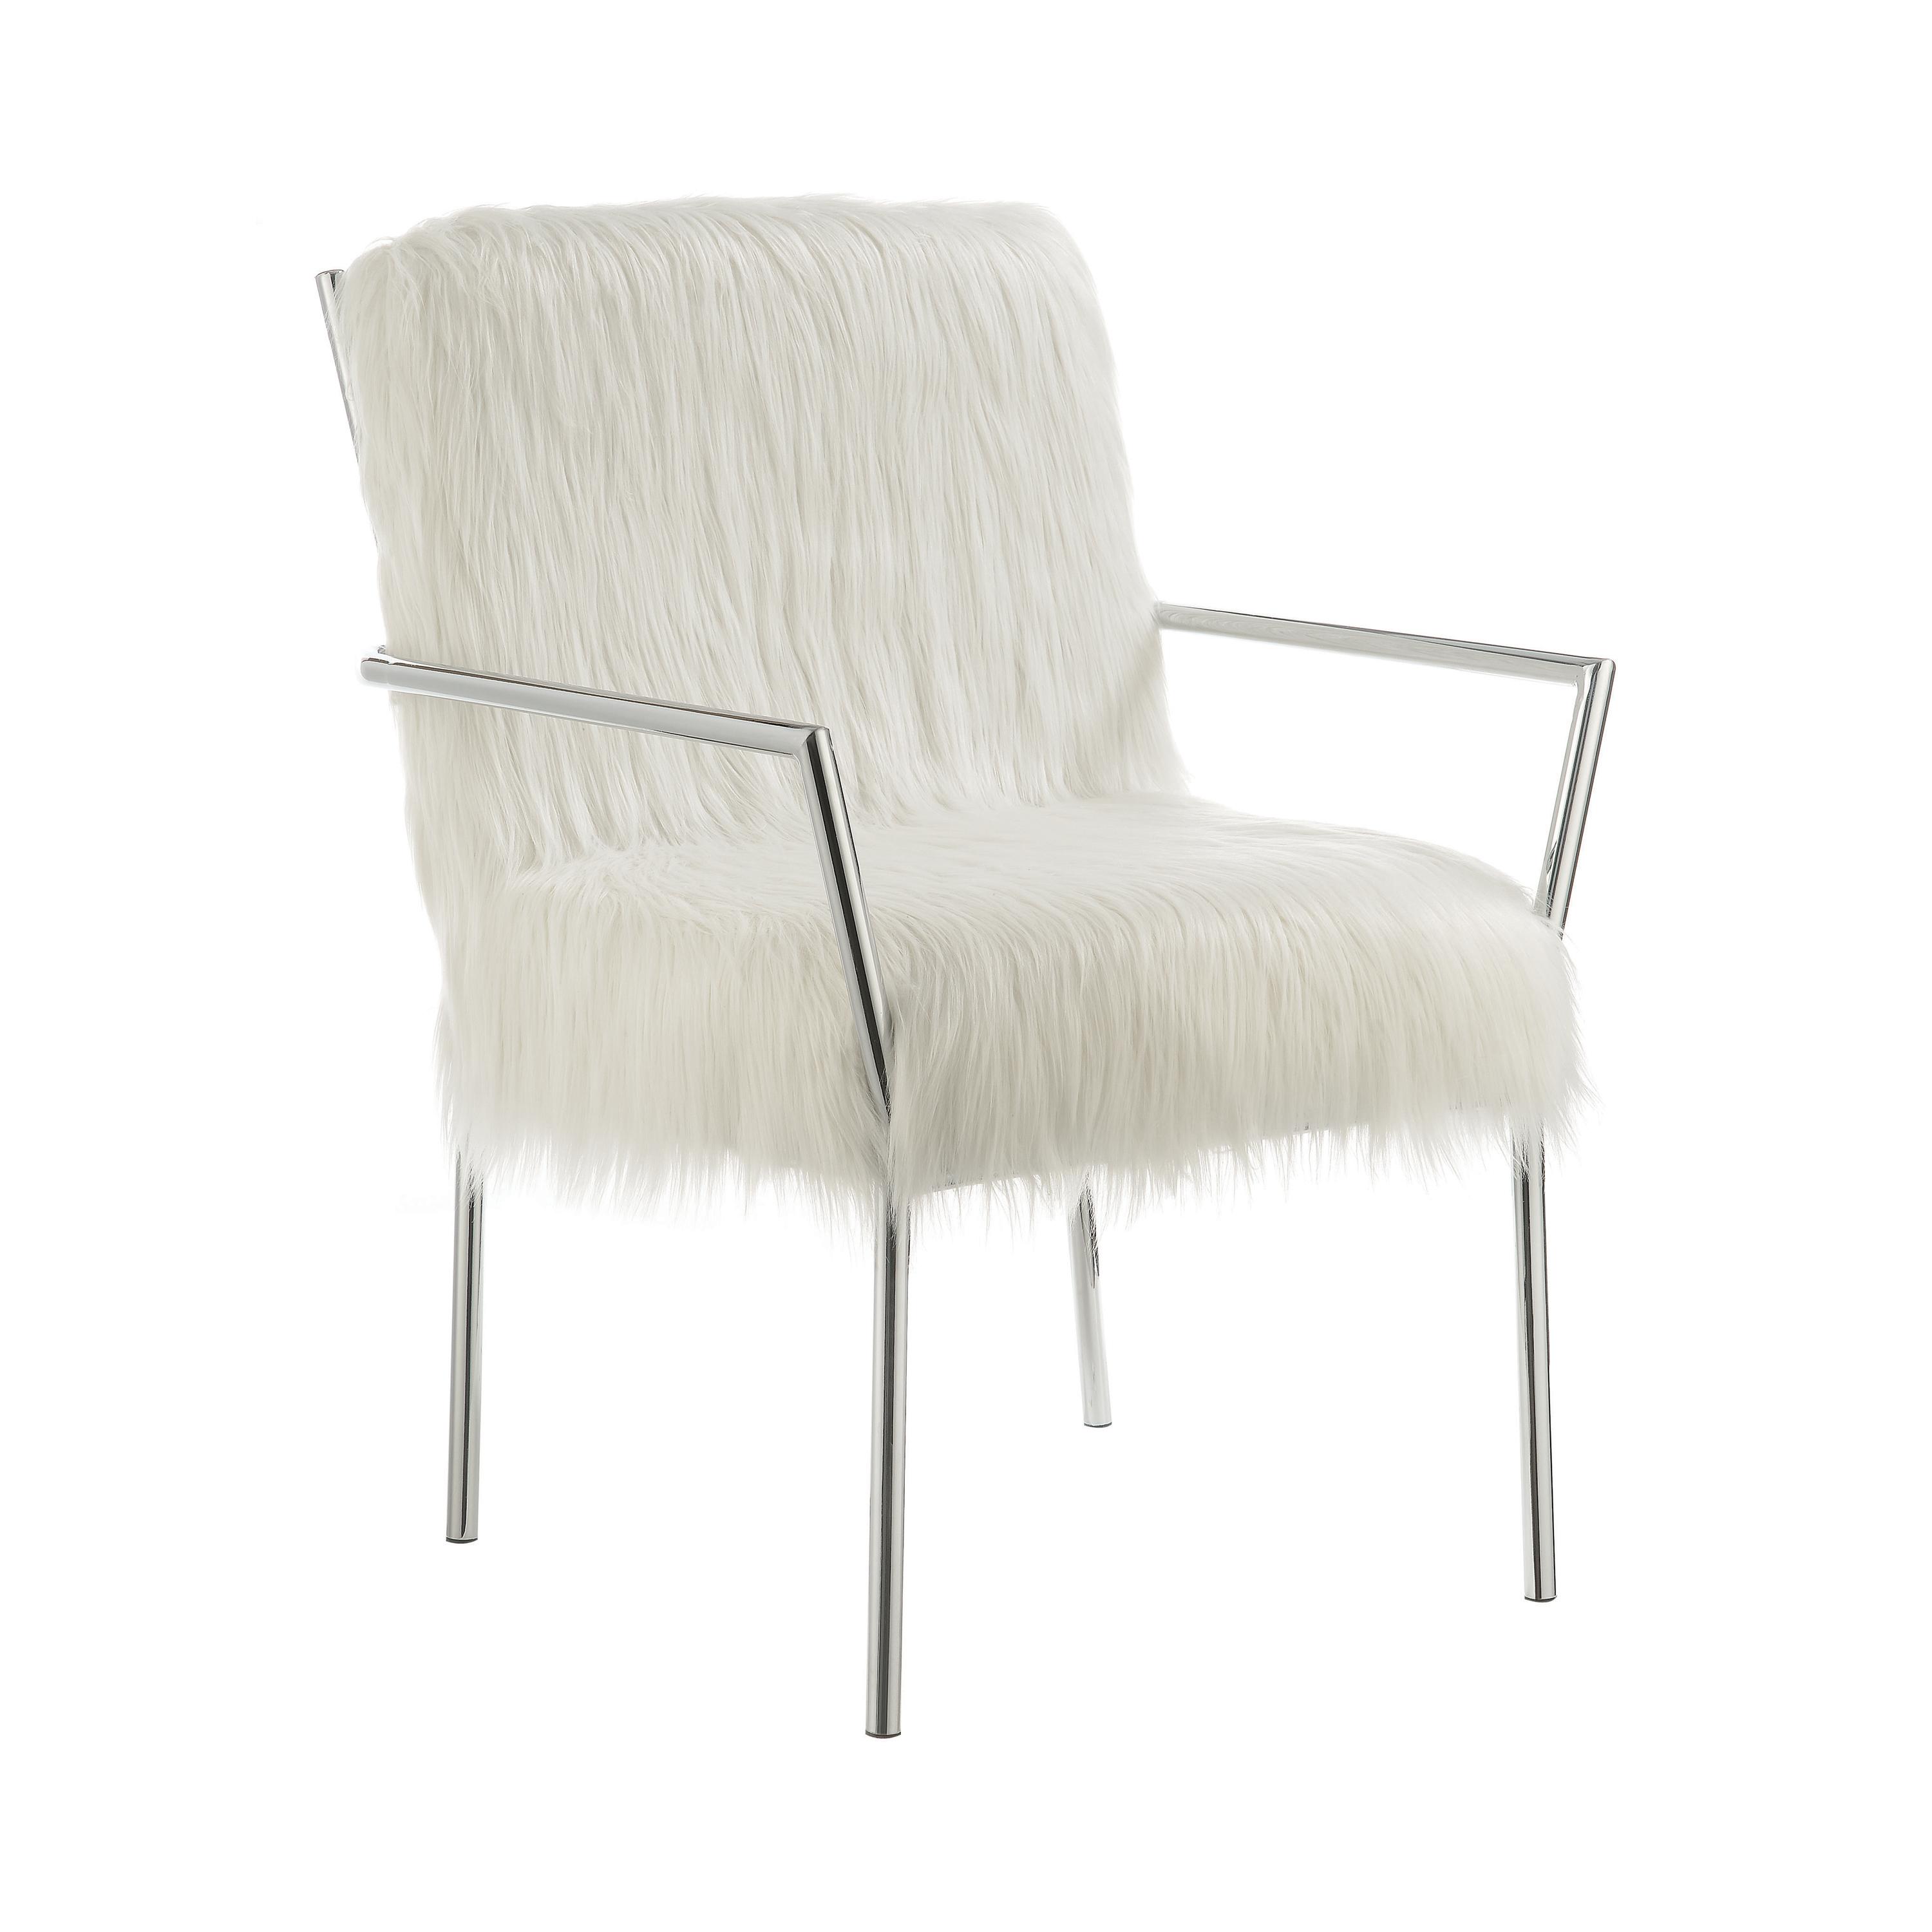 Modern Accent Chair 904079 904079 in White 